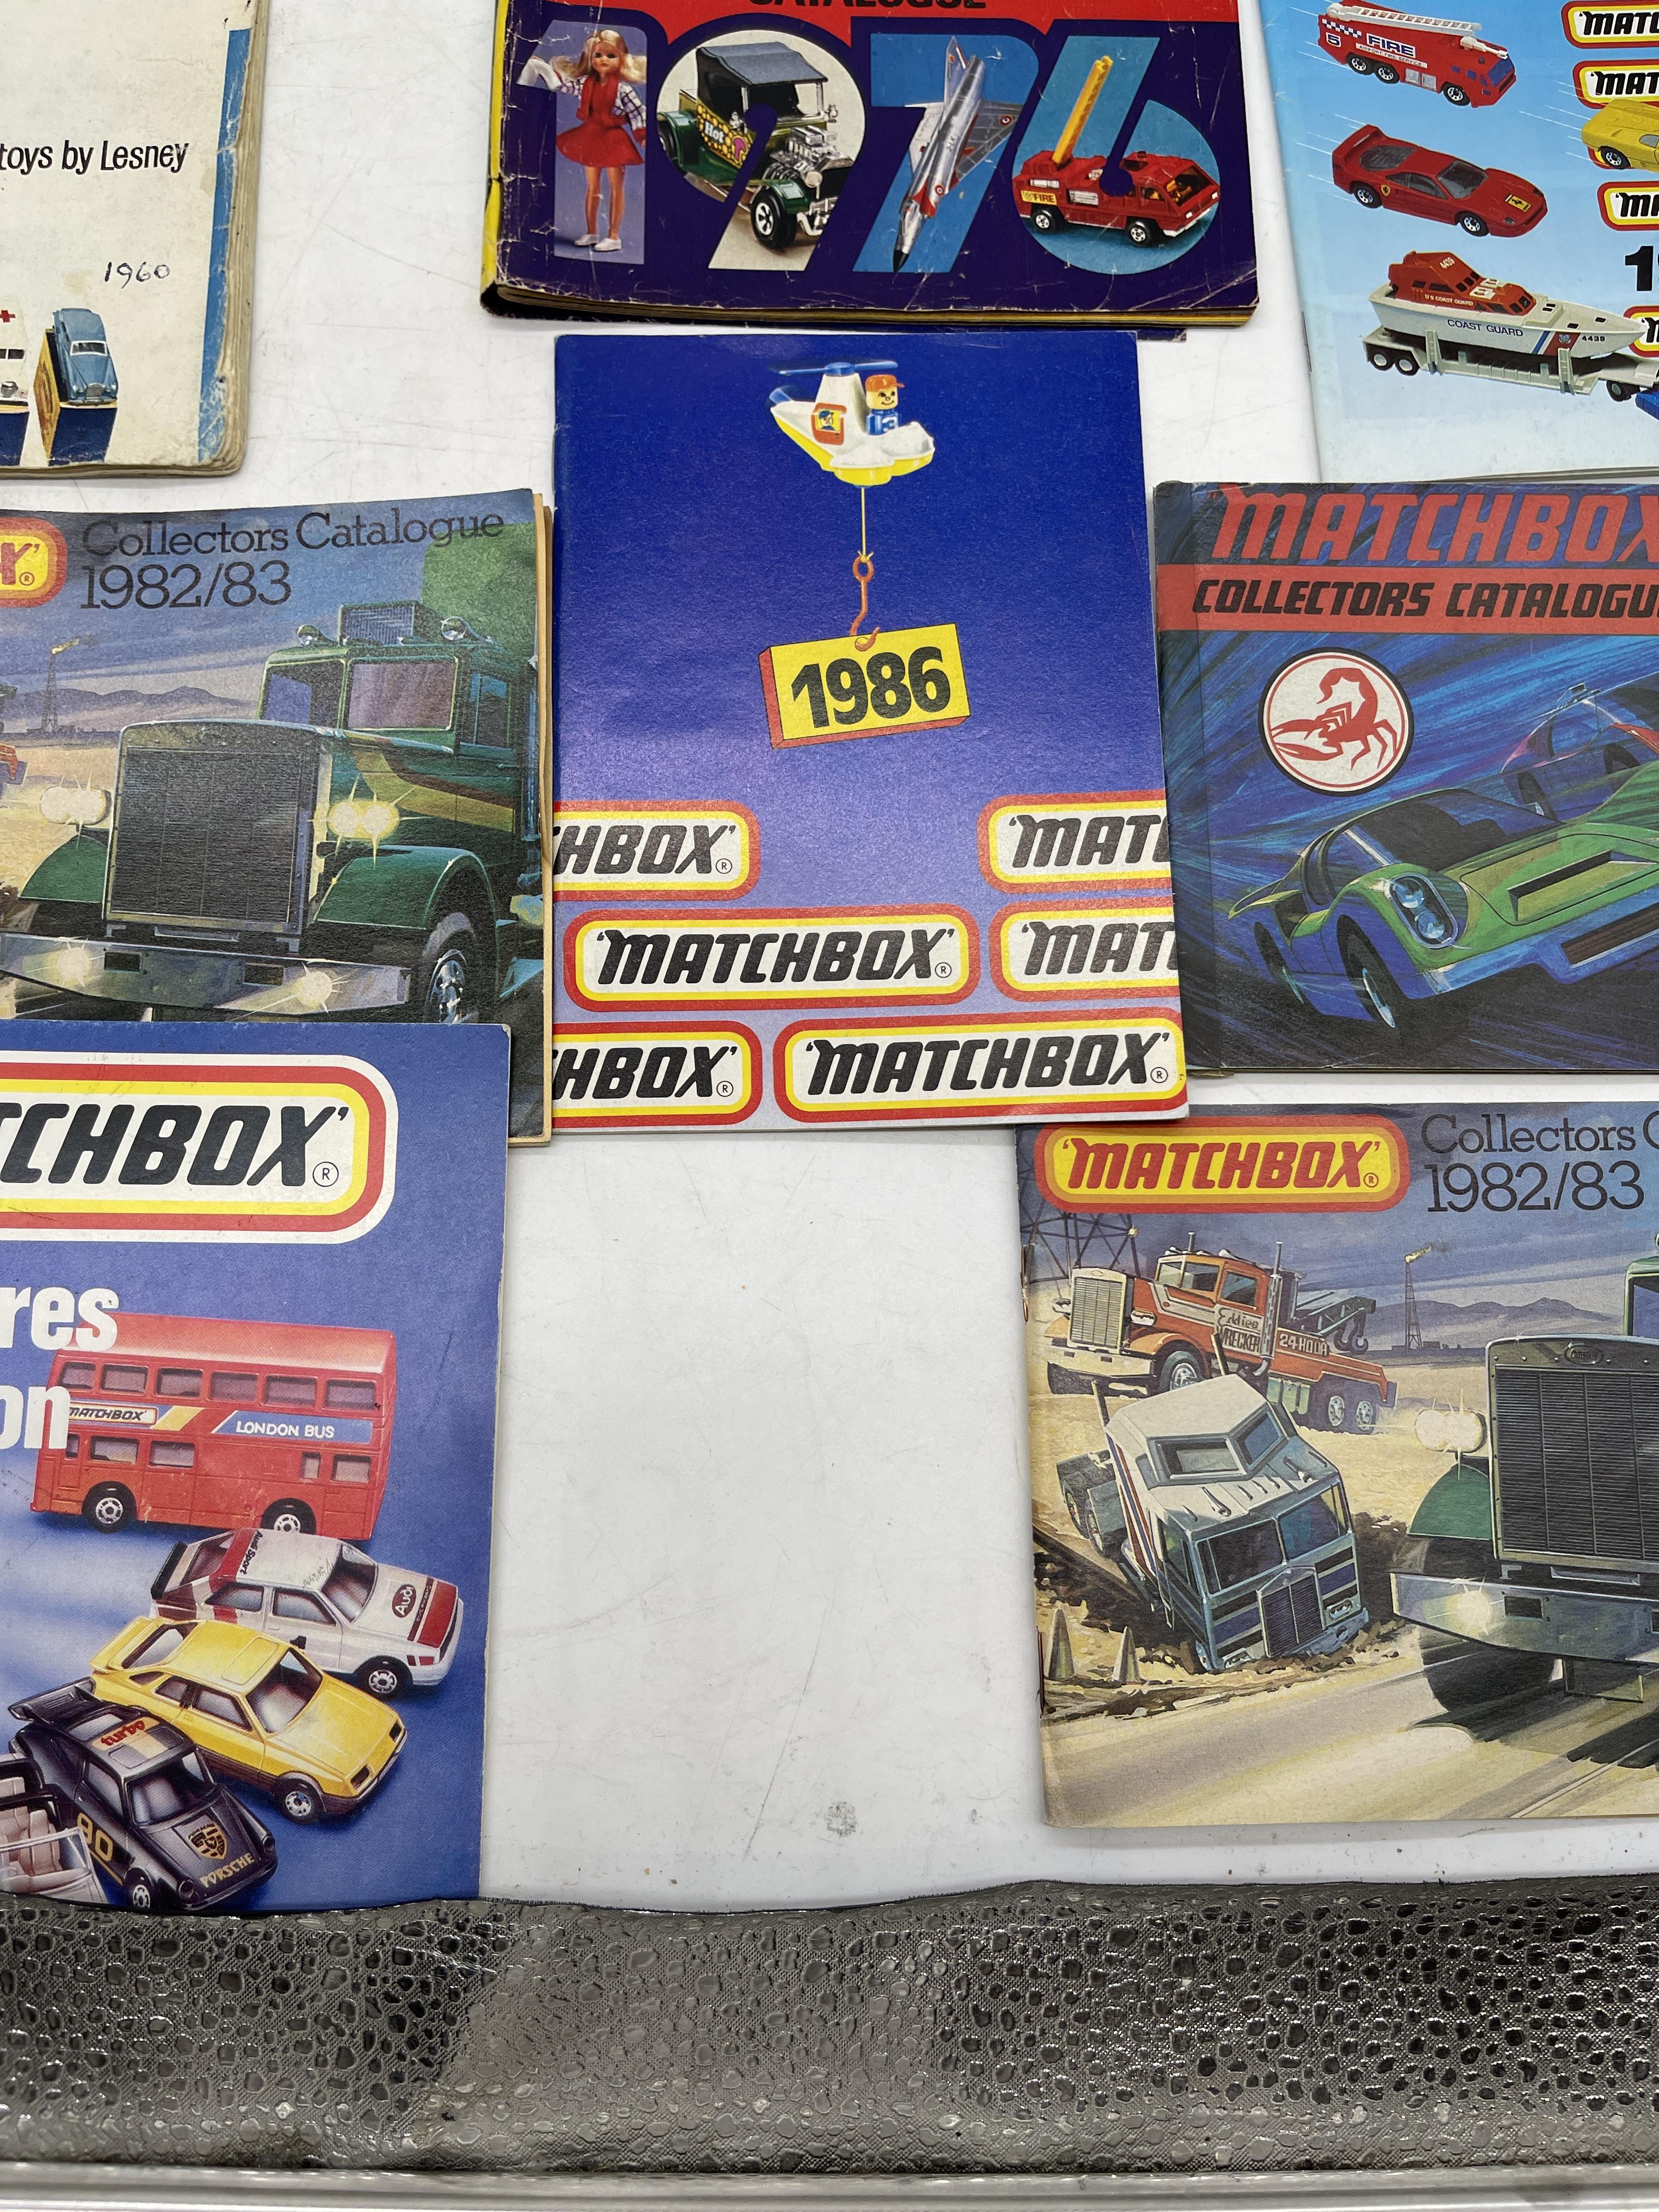 Vintage model car catalogues to include matchbox pocket money 1960s - Image 17 of 20